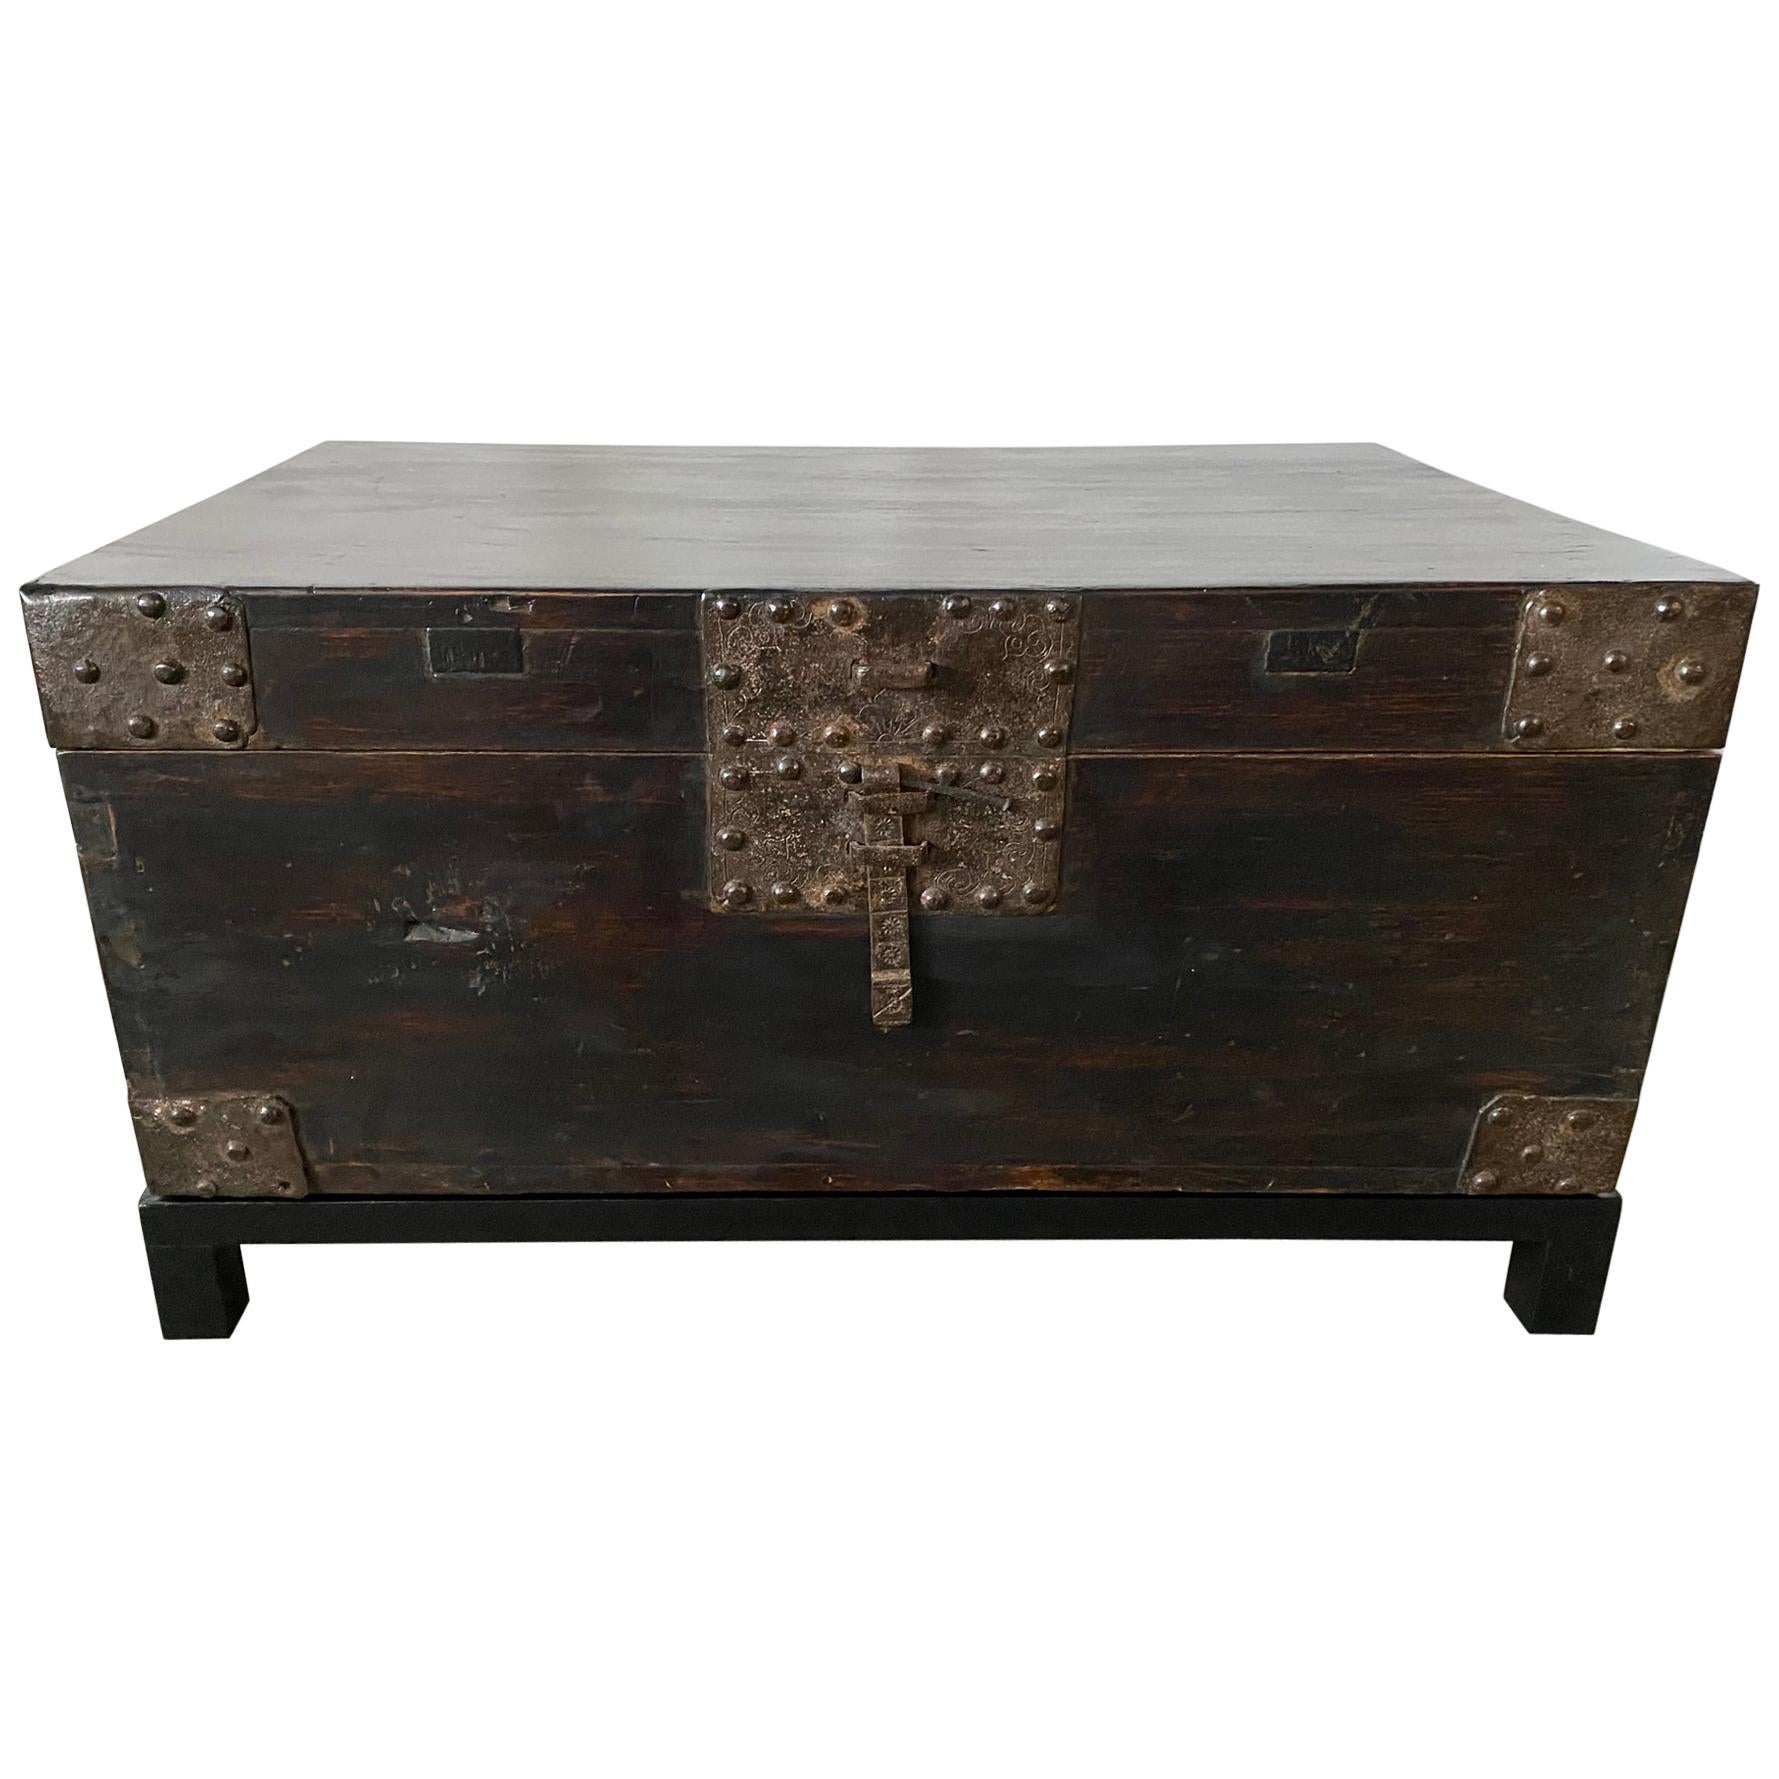 19th Century Chinese Lacquered Chest on Stand